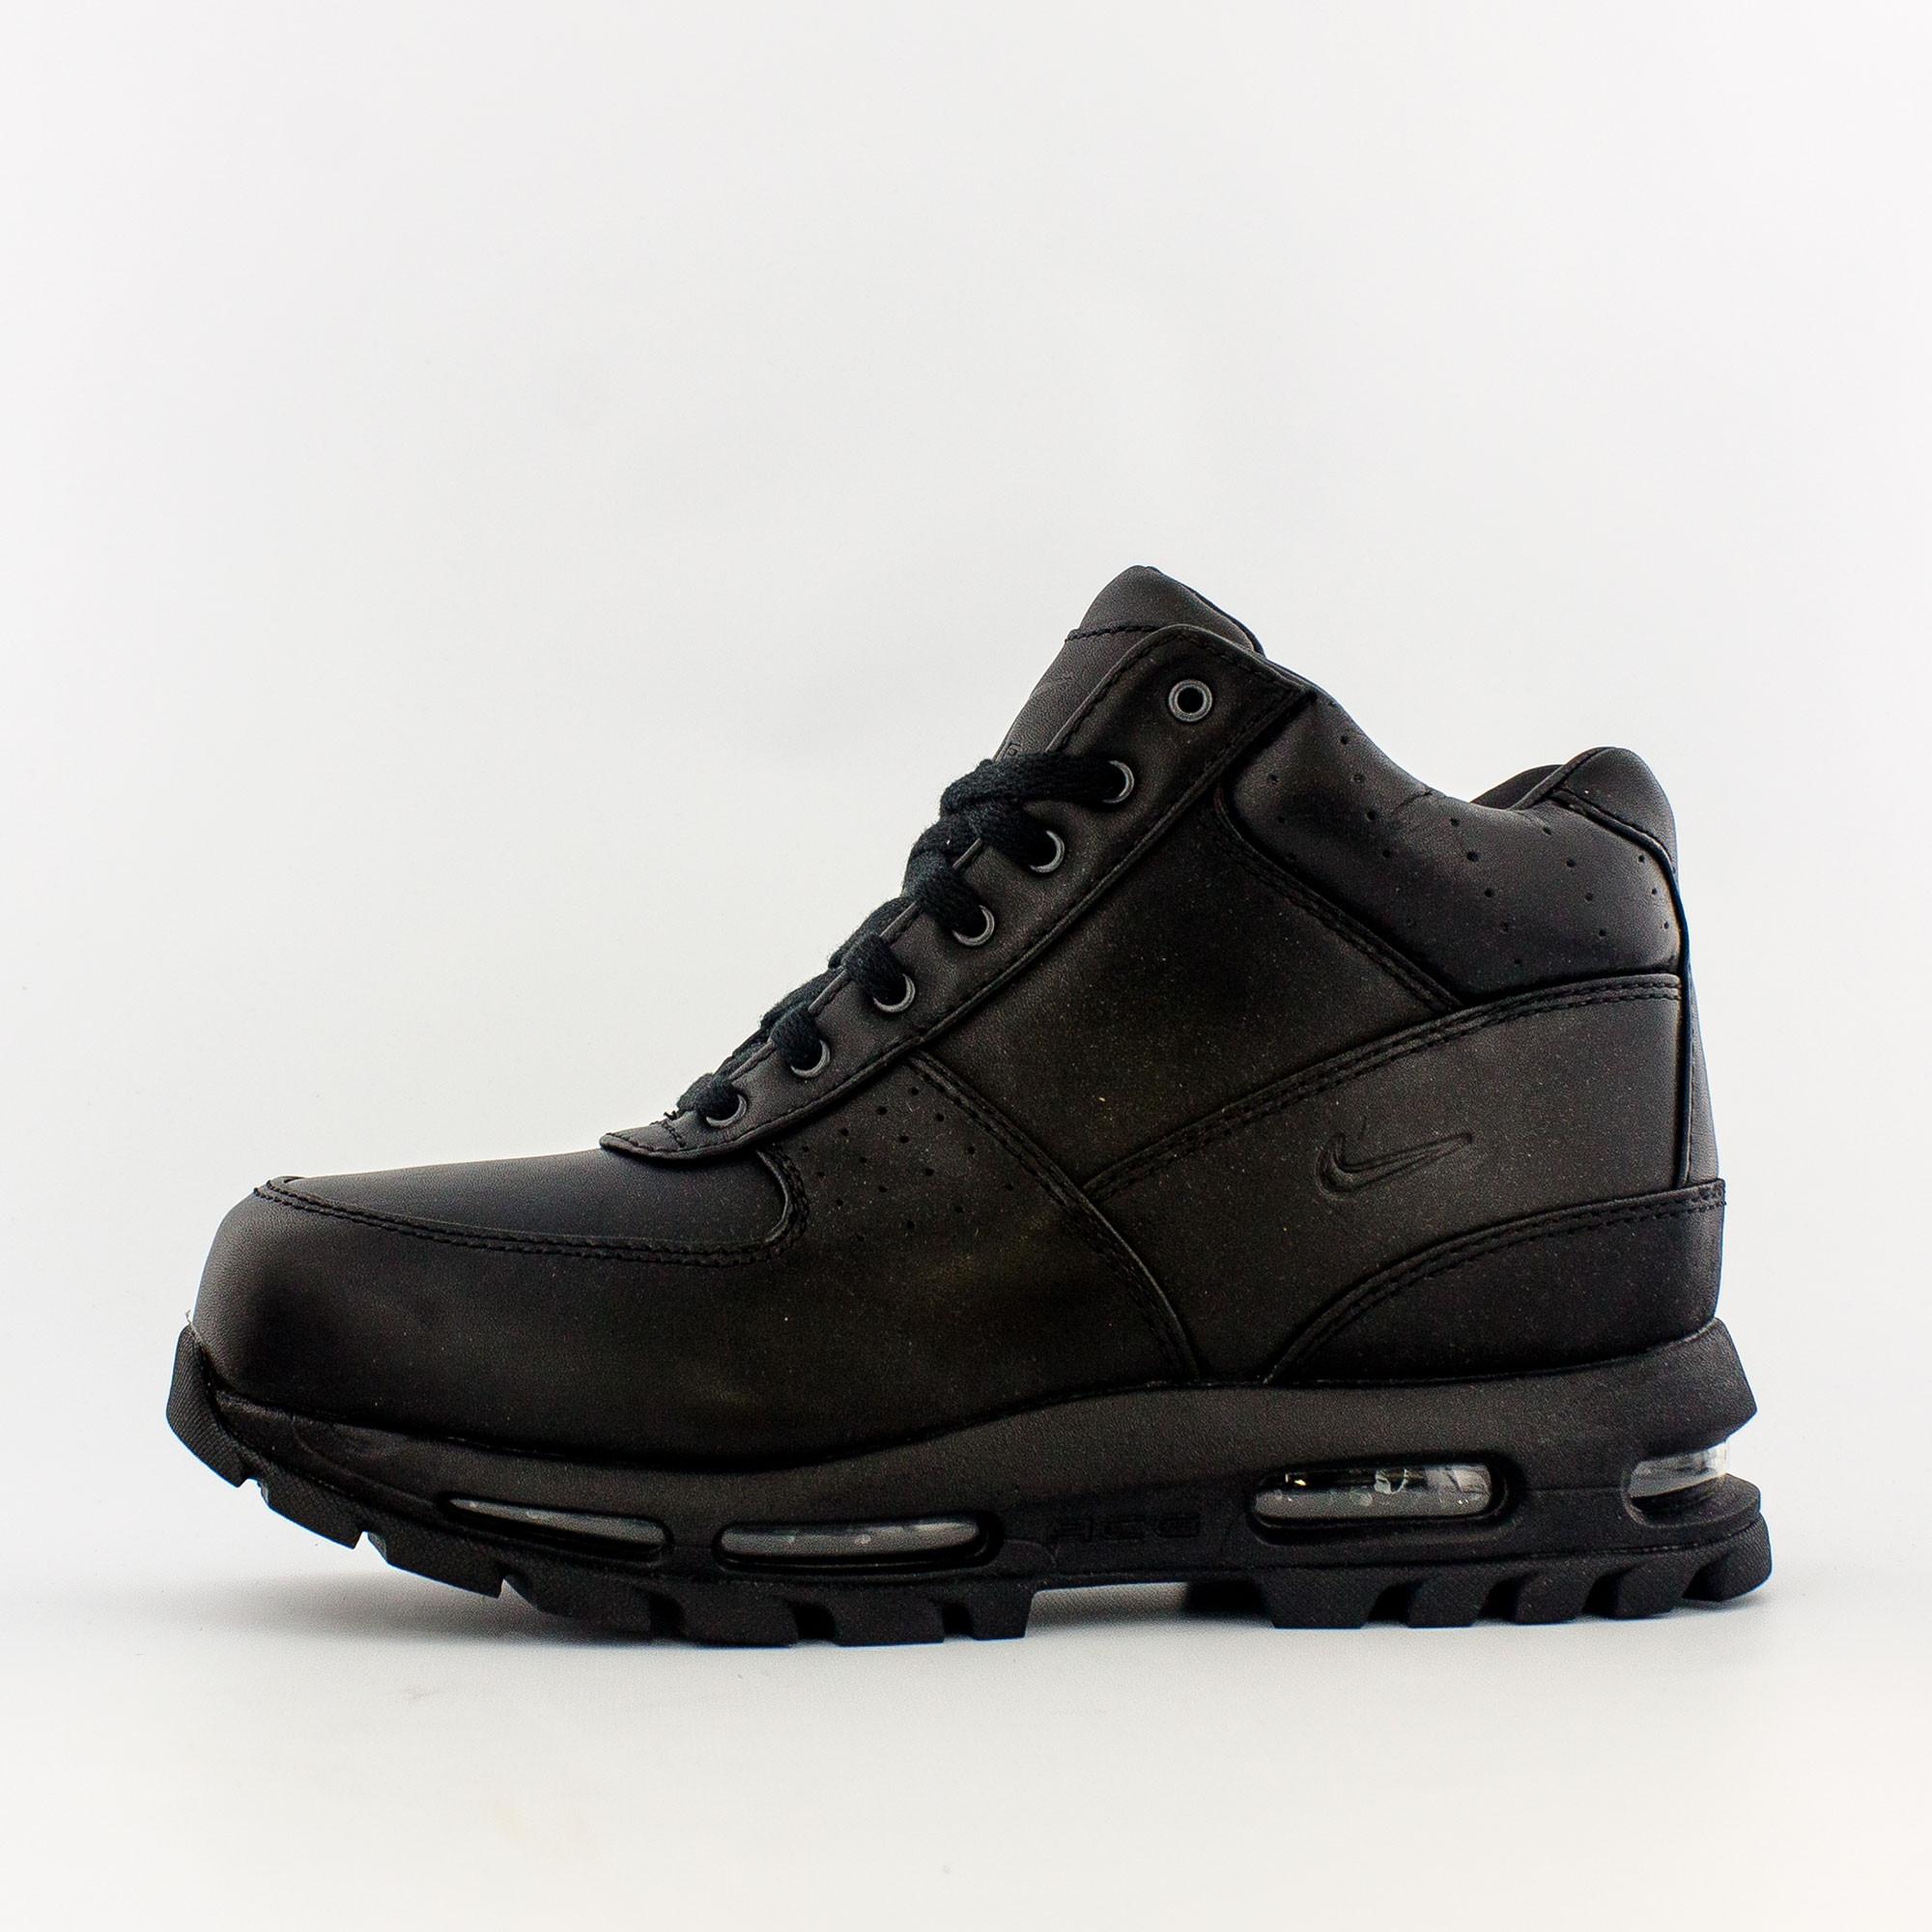 Nike Leather Air Max Goadome in Anthracite (Black) for Men - Lyst